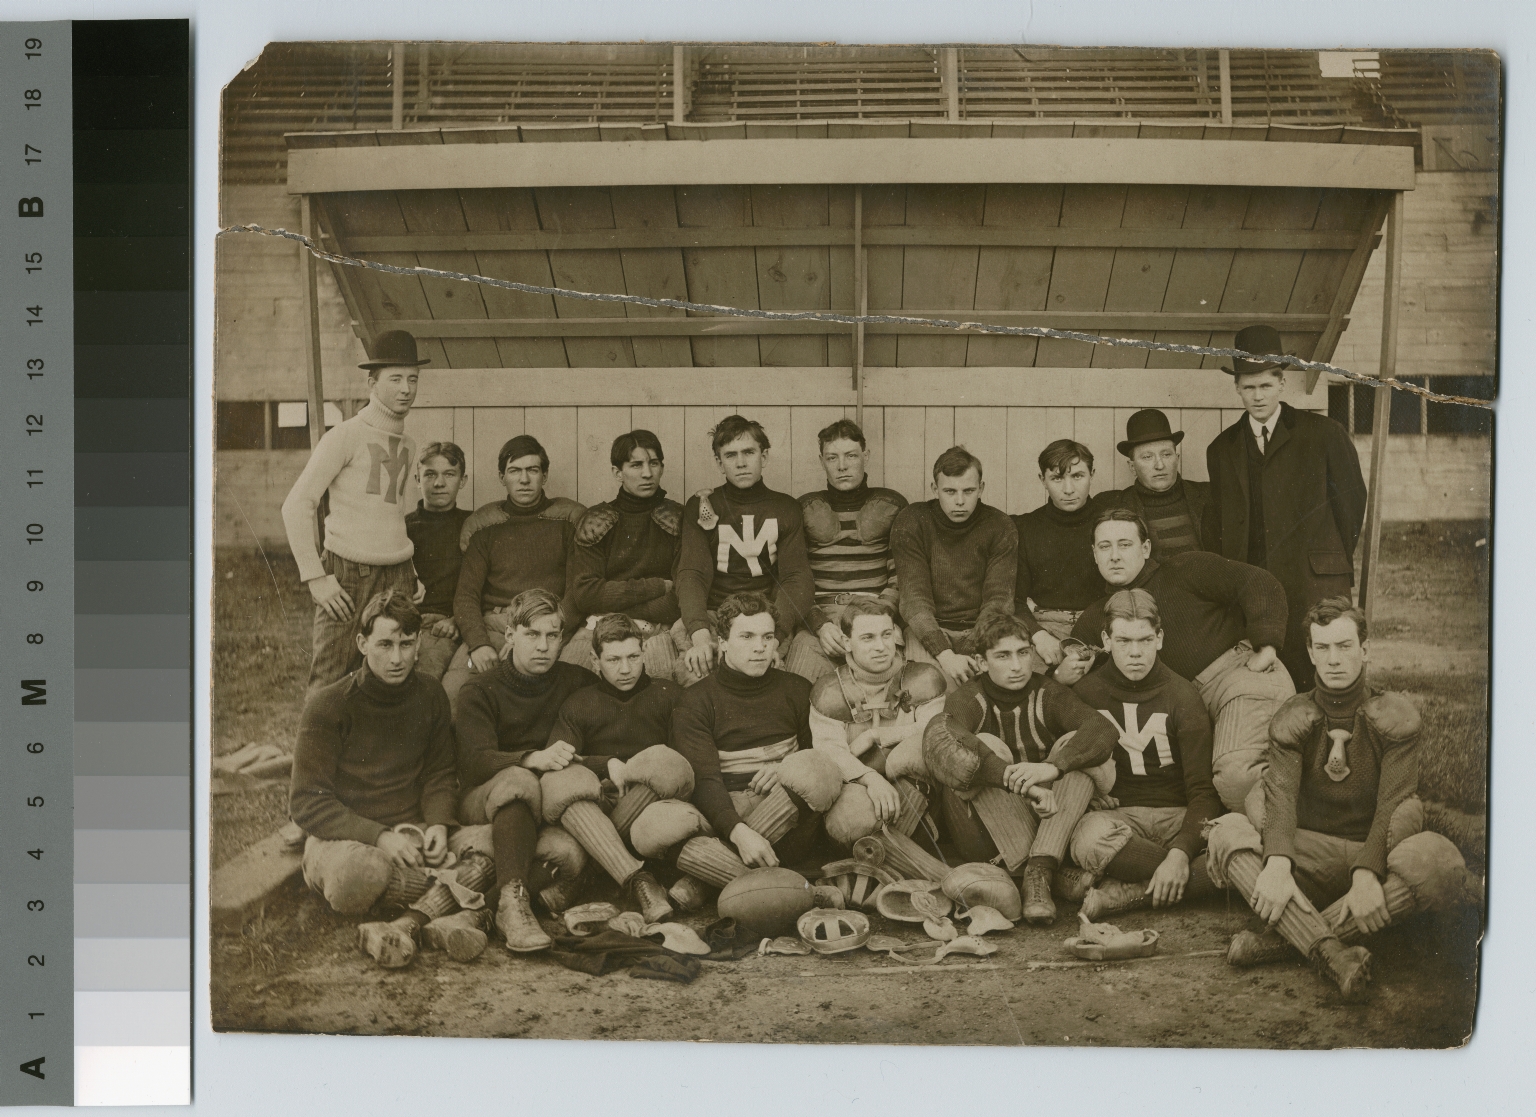 Student activities, group portrait of the Rochester Athenaeum and Mechanics Institute football team